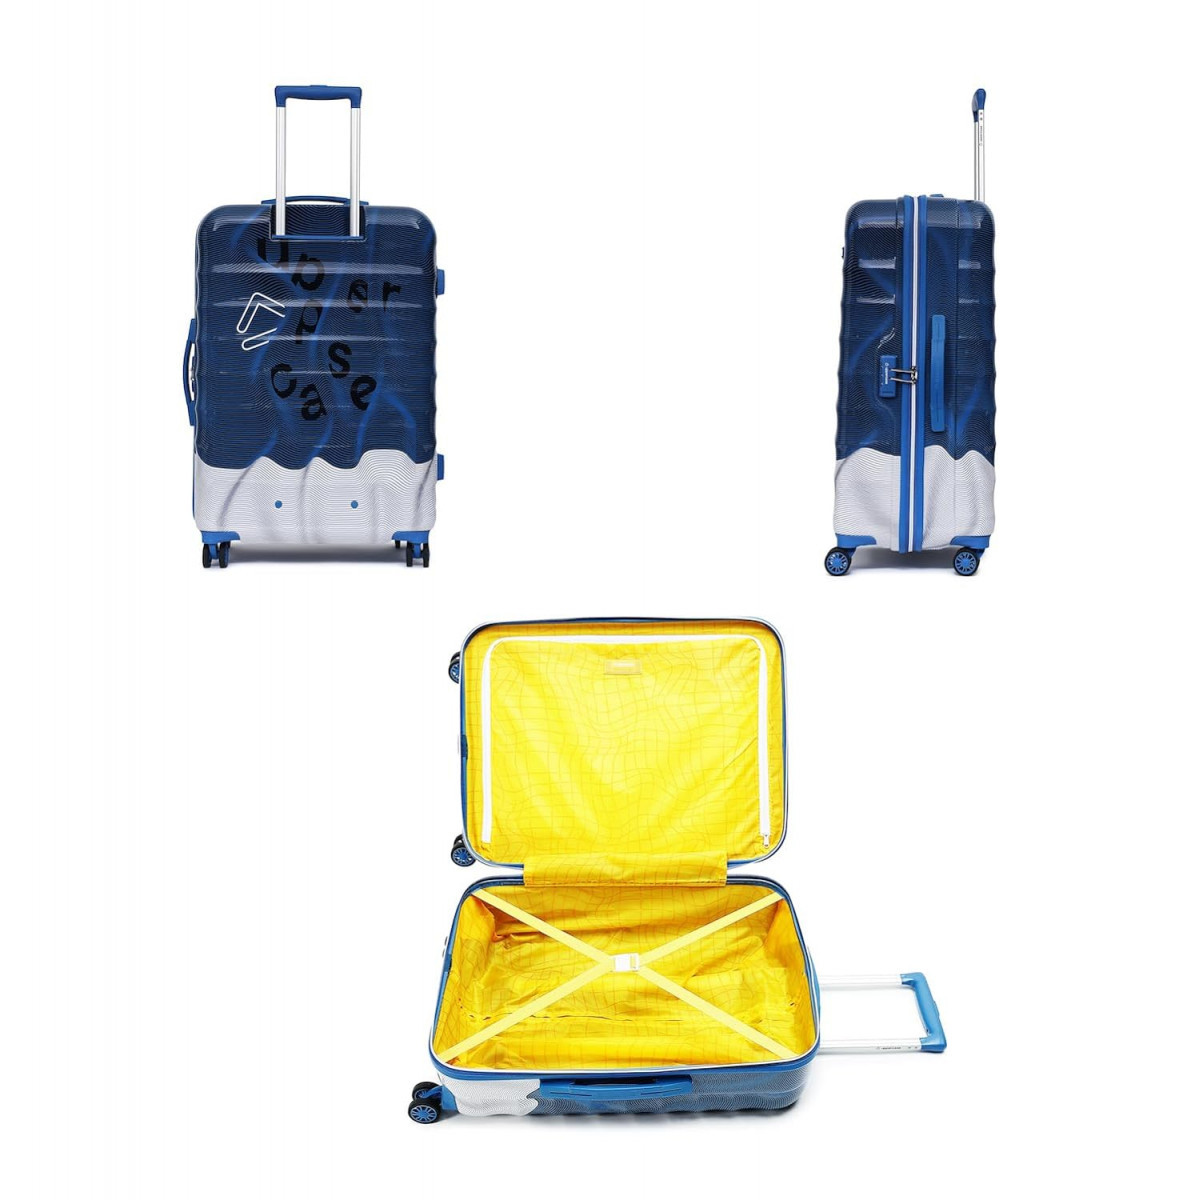 uppercase Ripple Trolley Bag Set Of 2 SL Cabin  Check-In Trolley Bag Hardsided Polycarbonate Luggage Combination Lock 8 Wheel Suitcase 2000 Days Warranty Blue 31 X 53 X 755 Cm Spinner